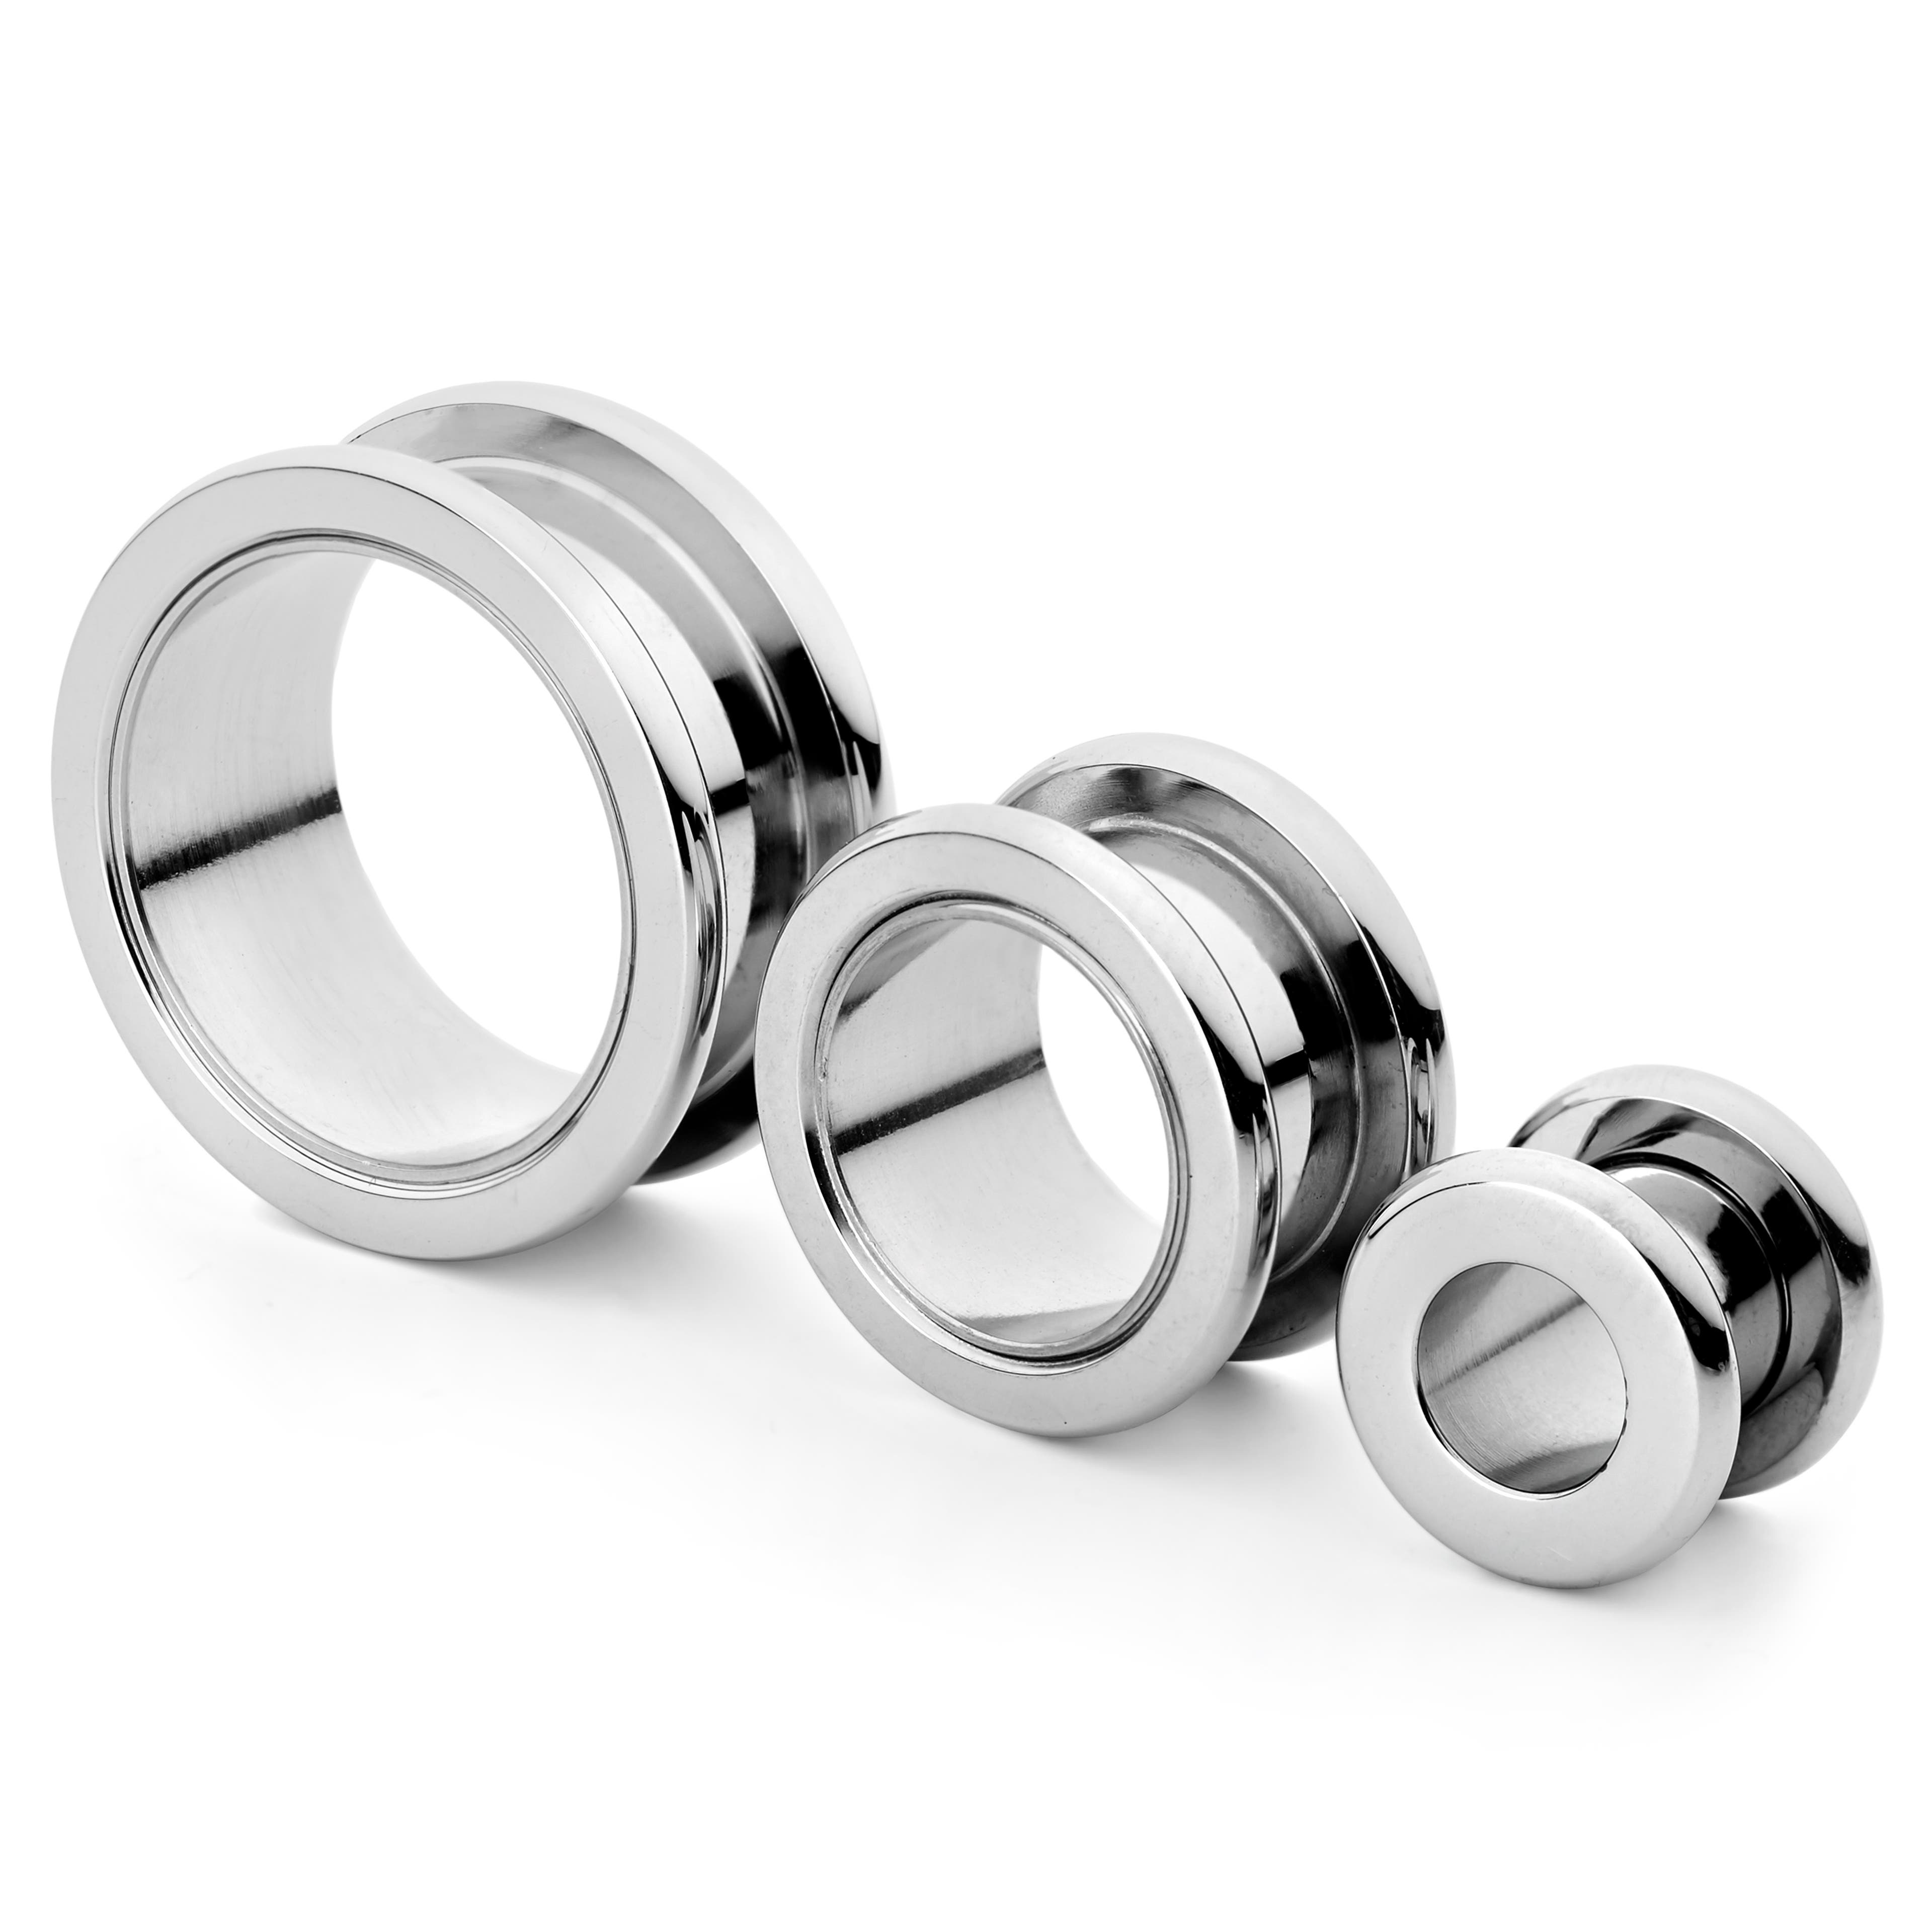 Silver-Tone Stainless Steel Thick-Rimmed Screw-Fit Tunnel Earring